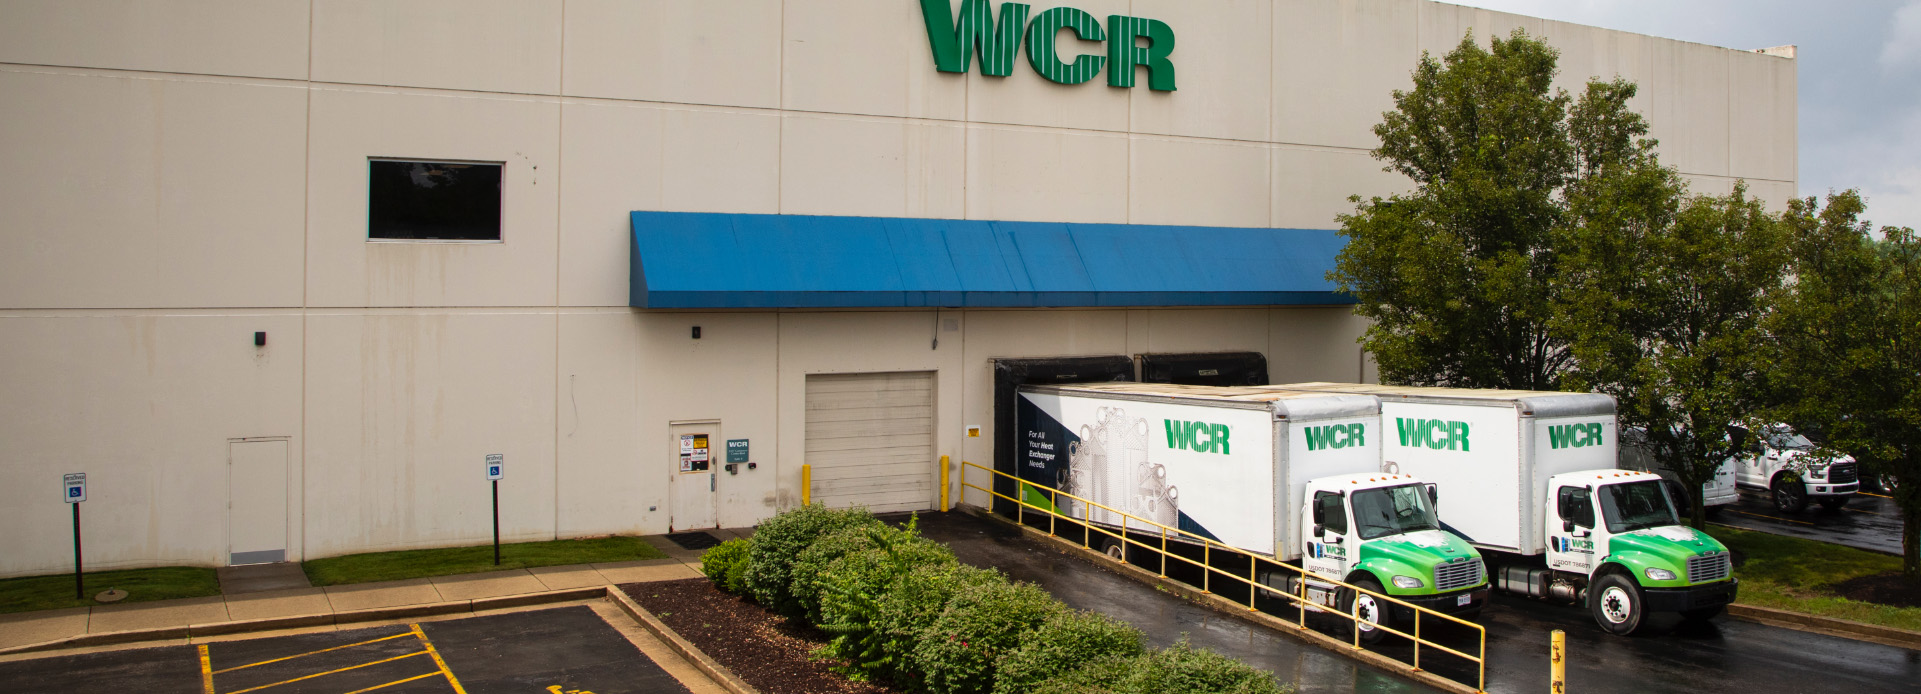 WCR trucks in loading dock at WCR facility